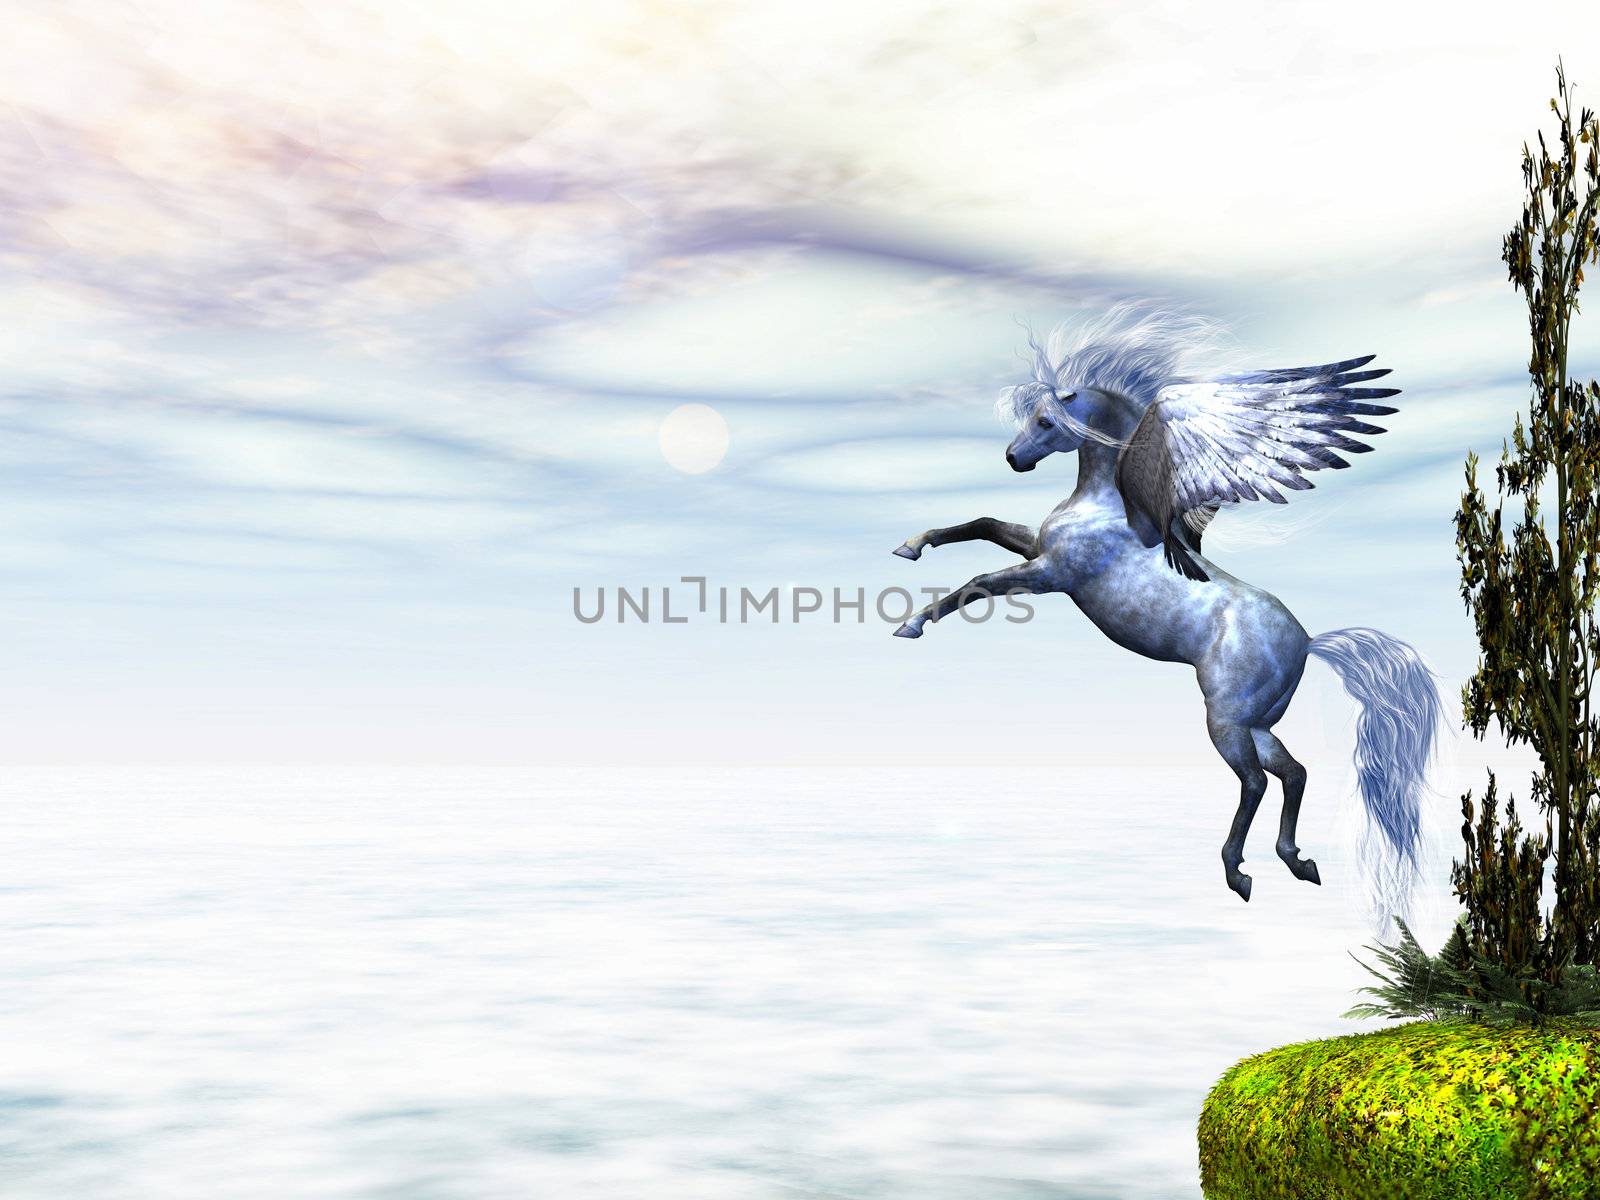 Pegasus, the fabled winged horse, takes to flight from a nearby cliff.